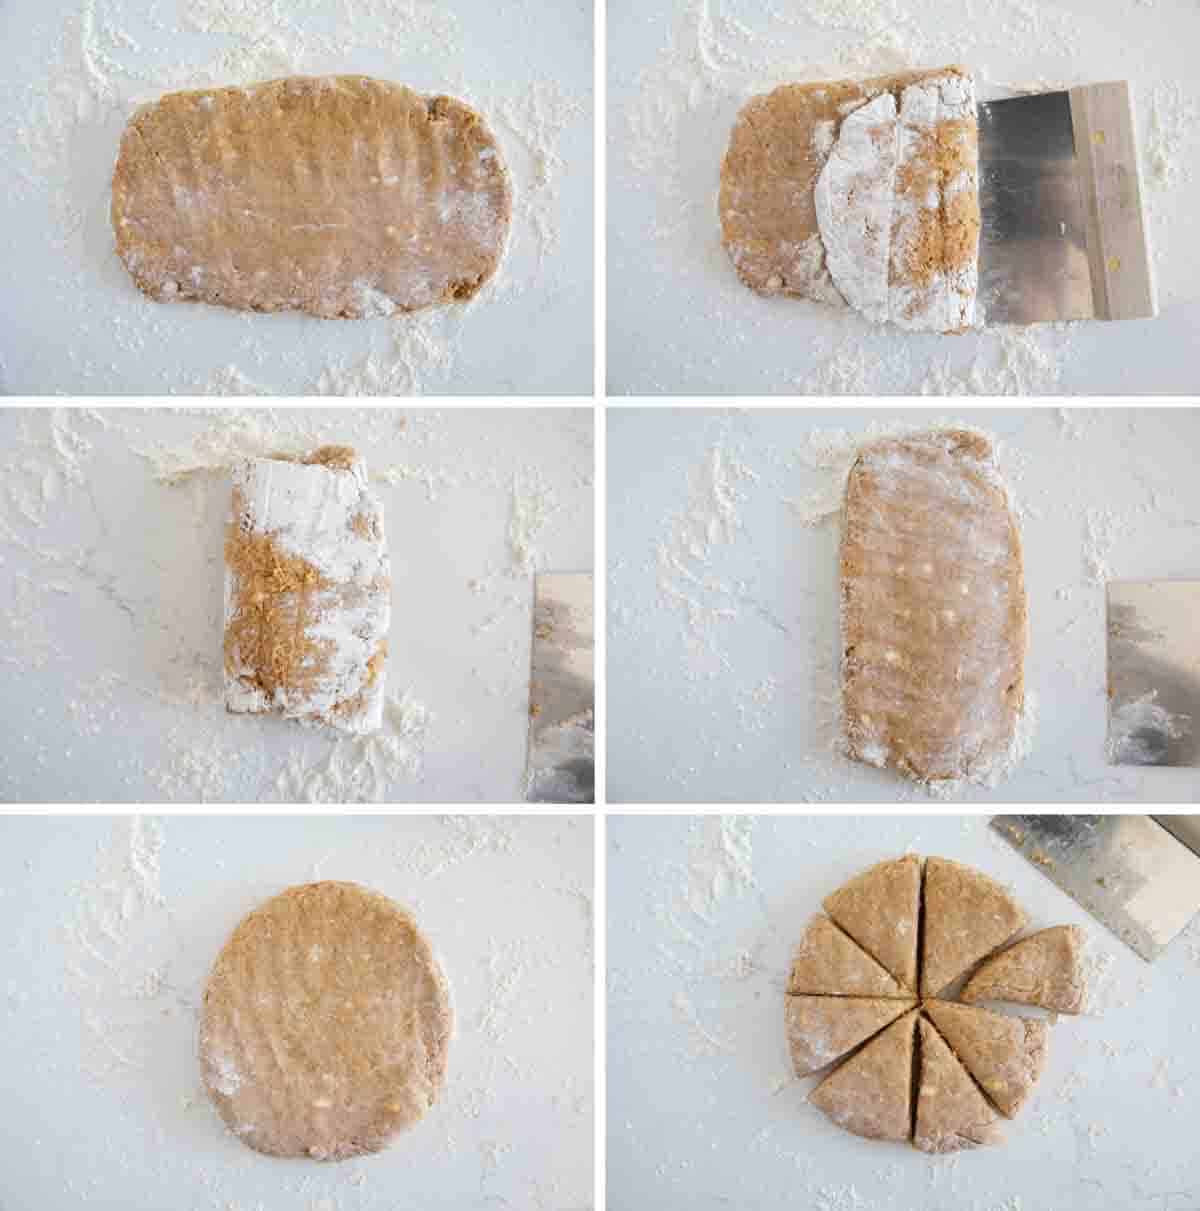 Steps to fold pumpkin scone dough and cut into wedges.